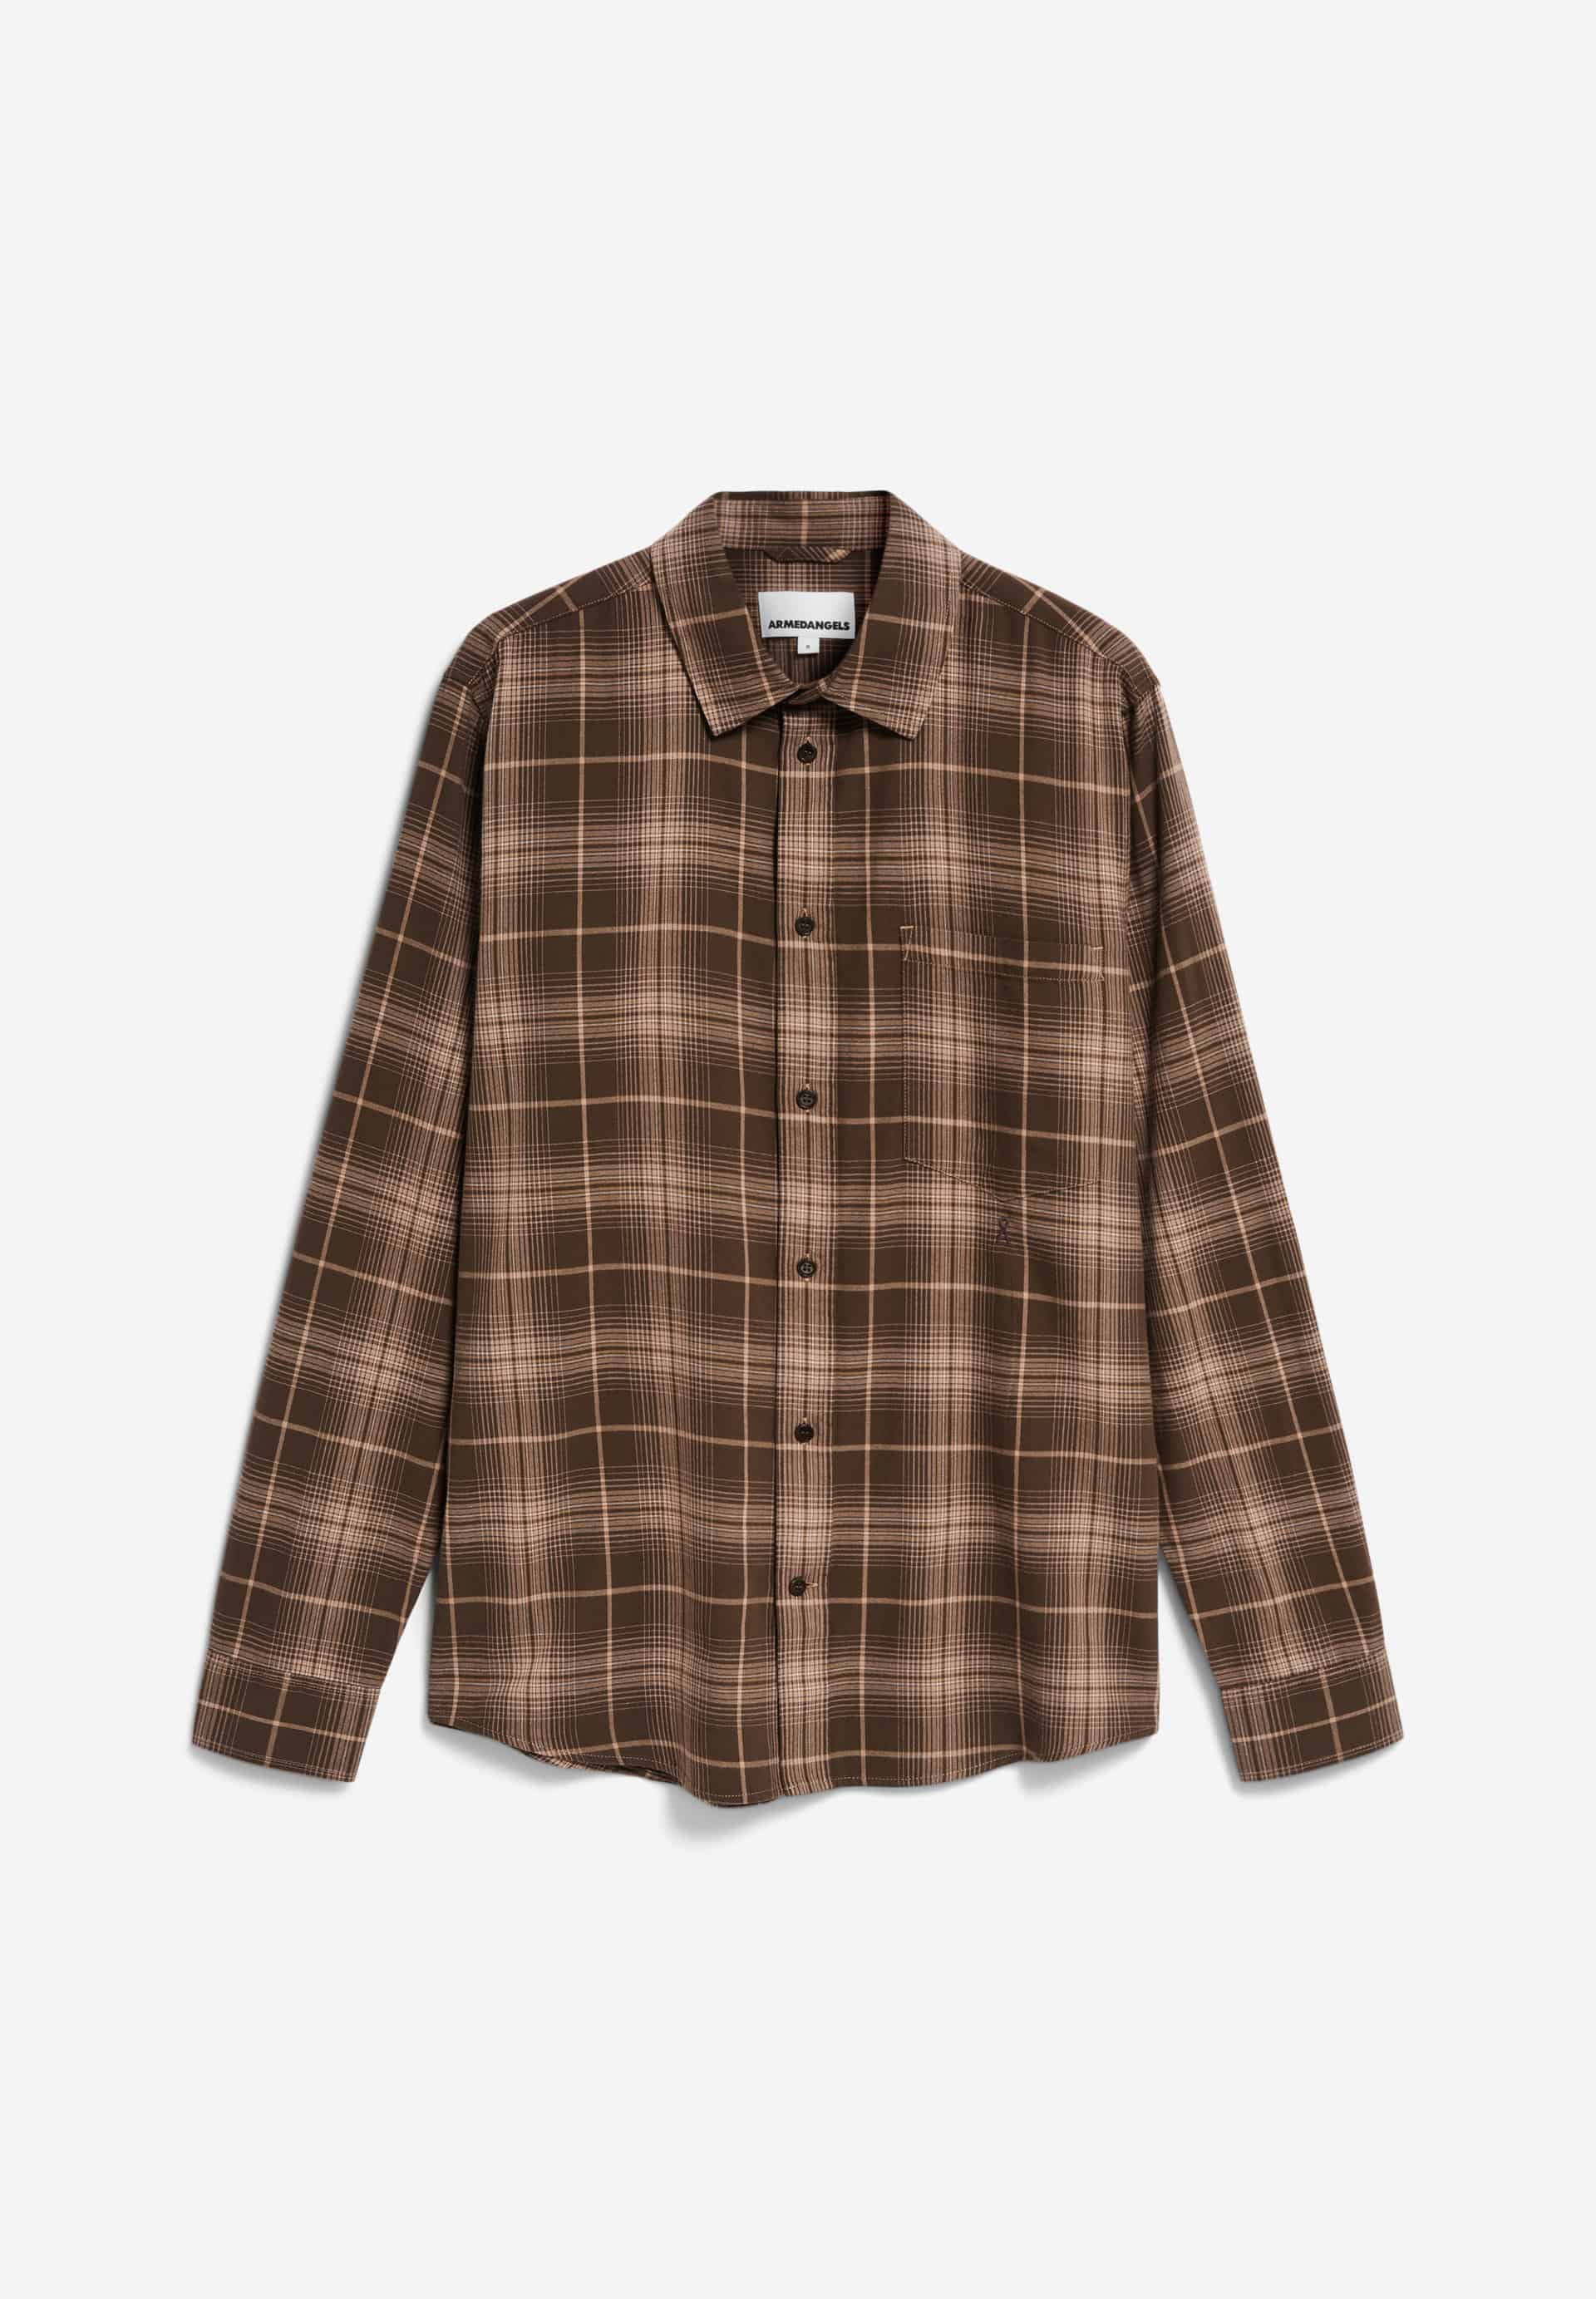 AARNAULT Shirt Relaxed Fit made of Organic Cotton